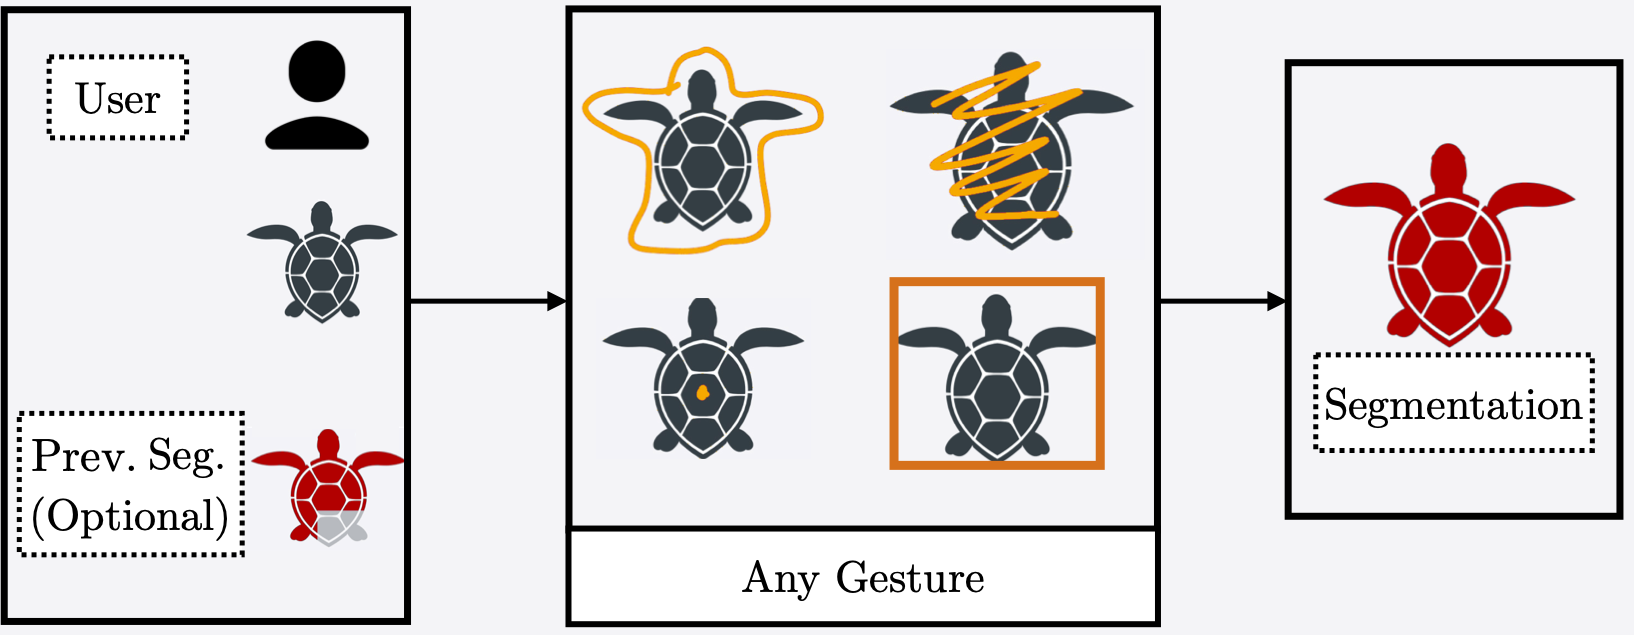 A schematic showing the proposed gesture-agnostic context-free interactive segmentation task. The left column shows a human, a turtle (ROI), and an optional previous segmentation. The middle column shows that different gesture types can be used, such as clicks or scribbles. The right shows a final segmentation.